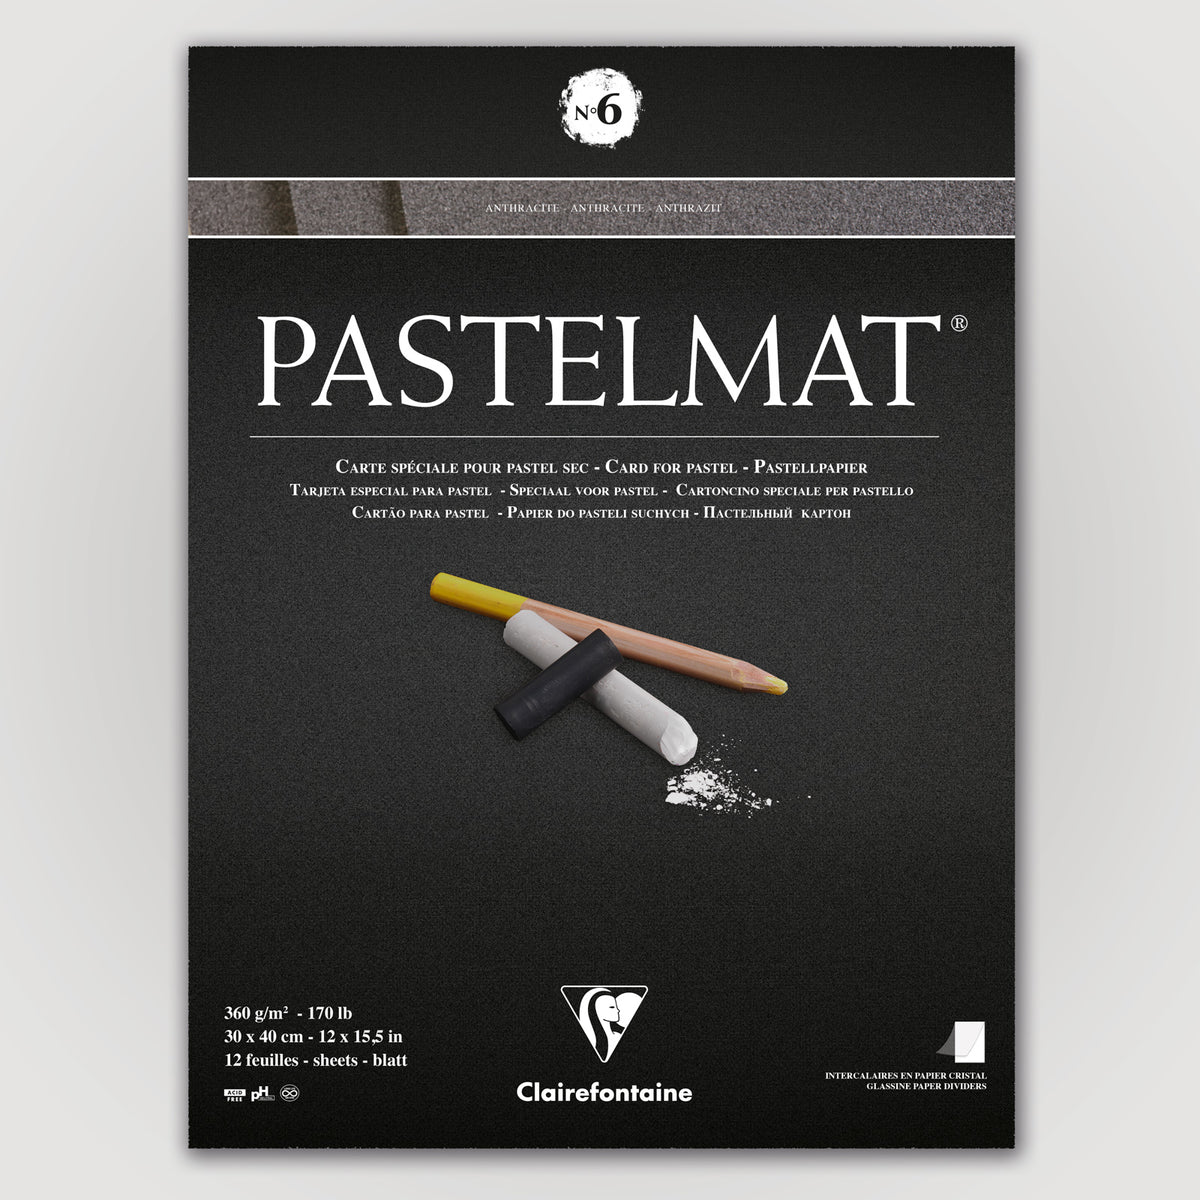 Clairefontaine Pastelmat N°6 360g 30x40 antr 12 sheets